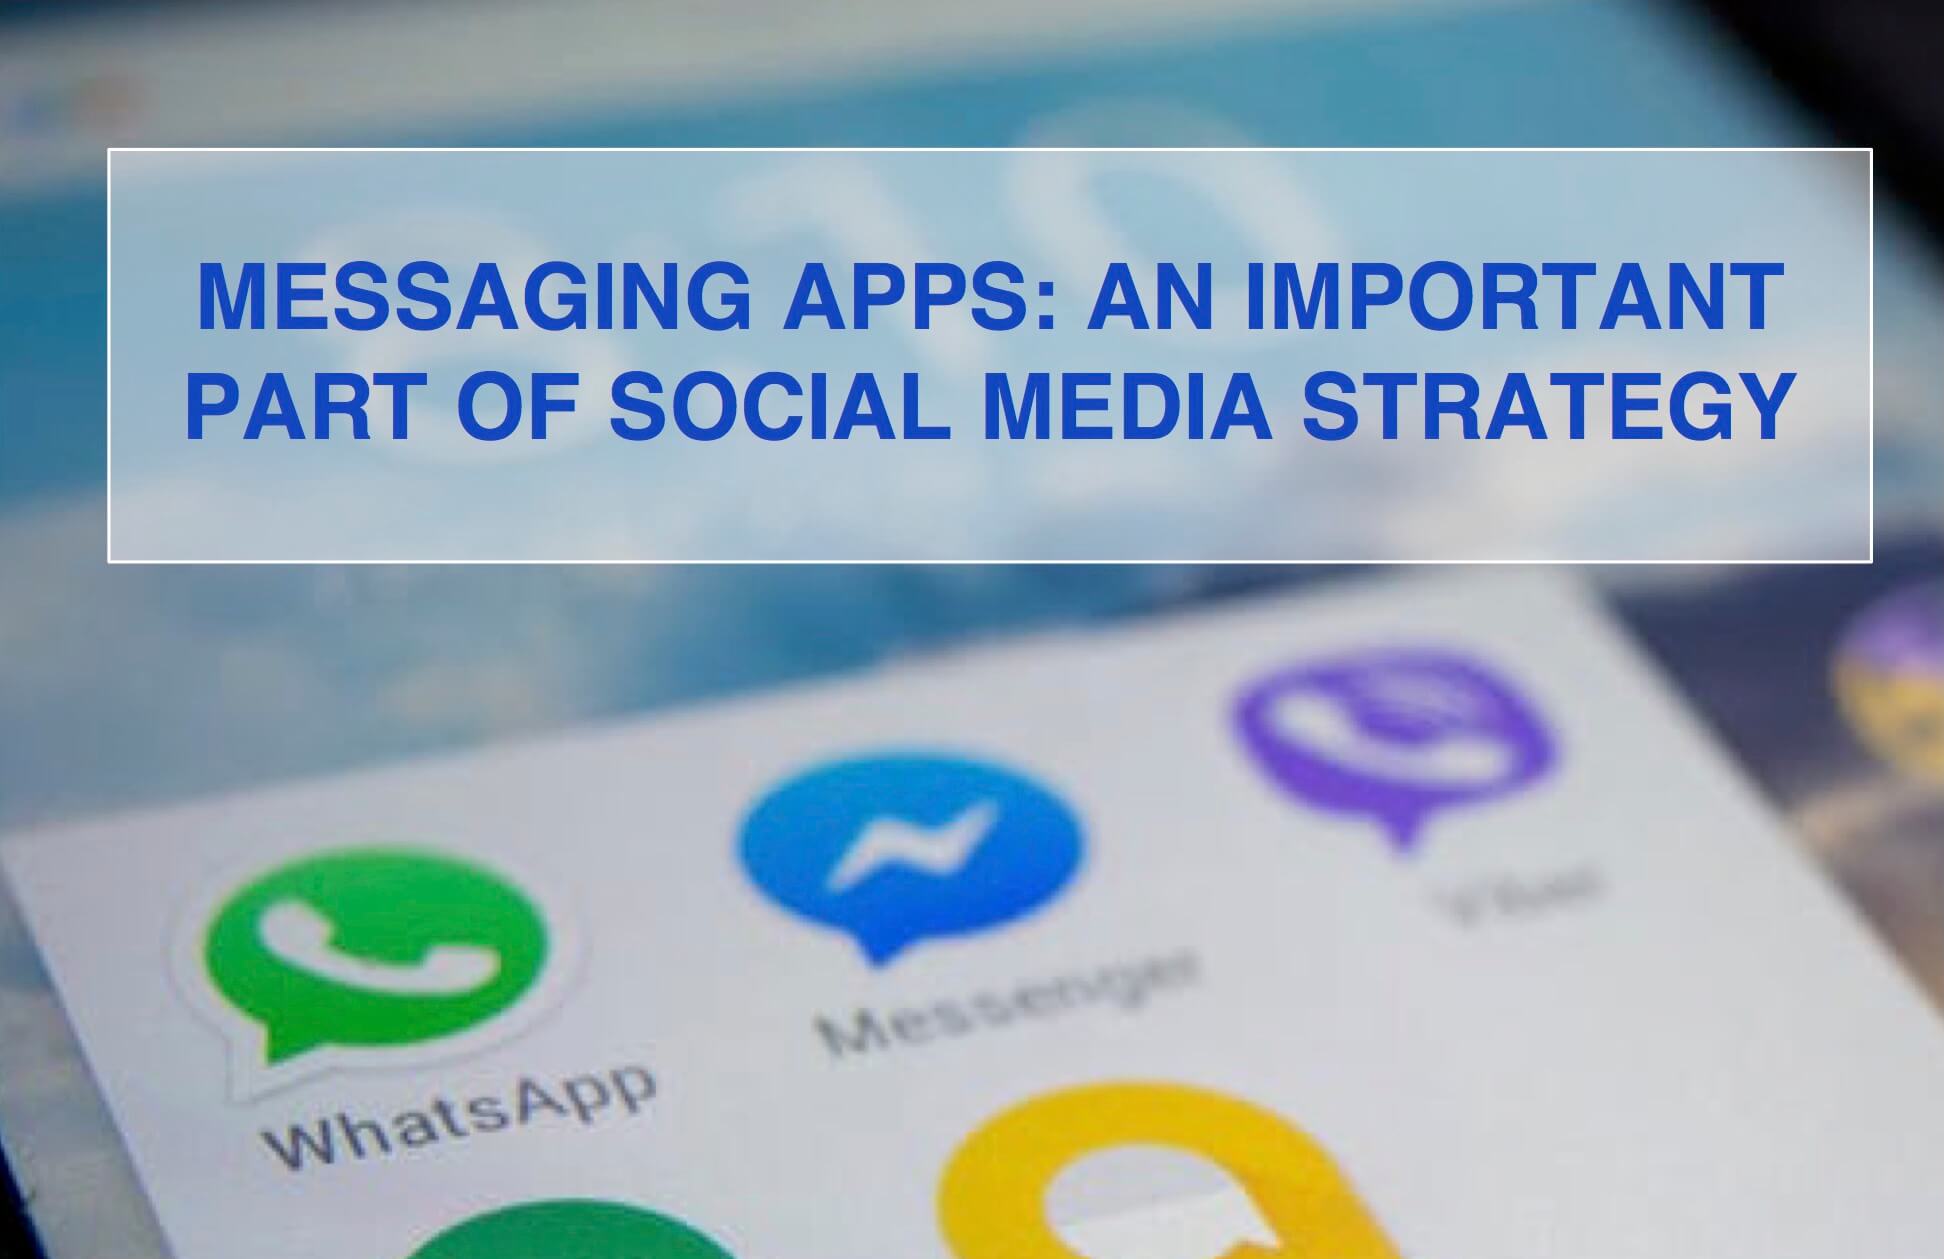 Messaging Apps in Social Media Strategy